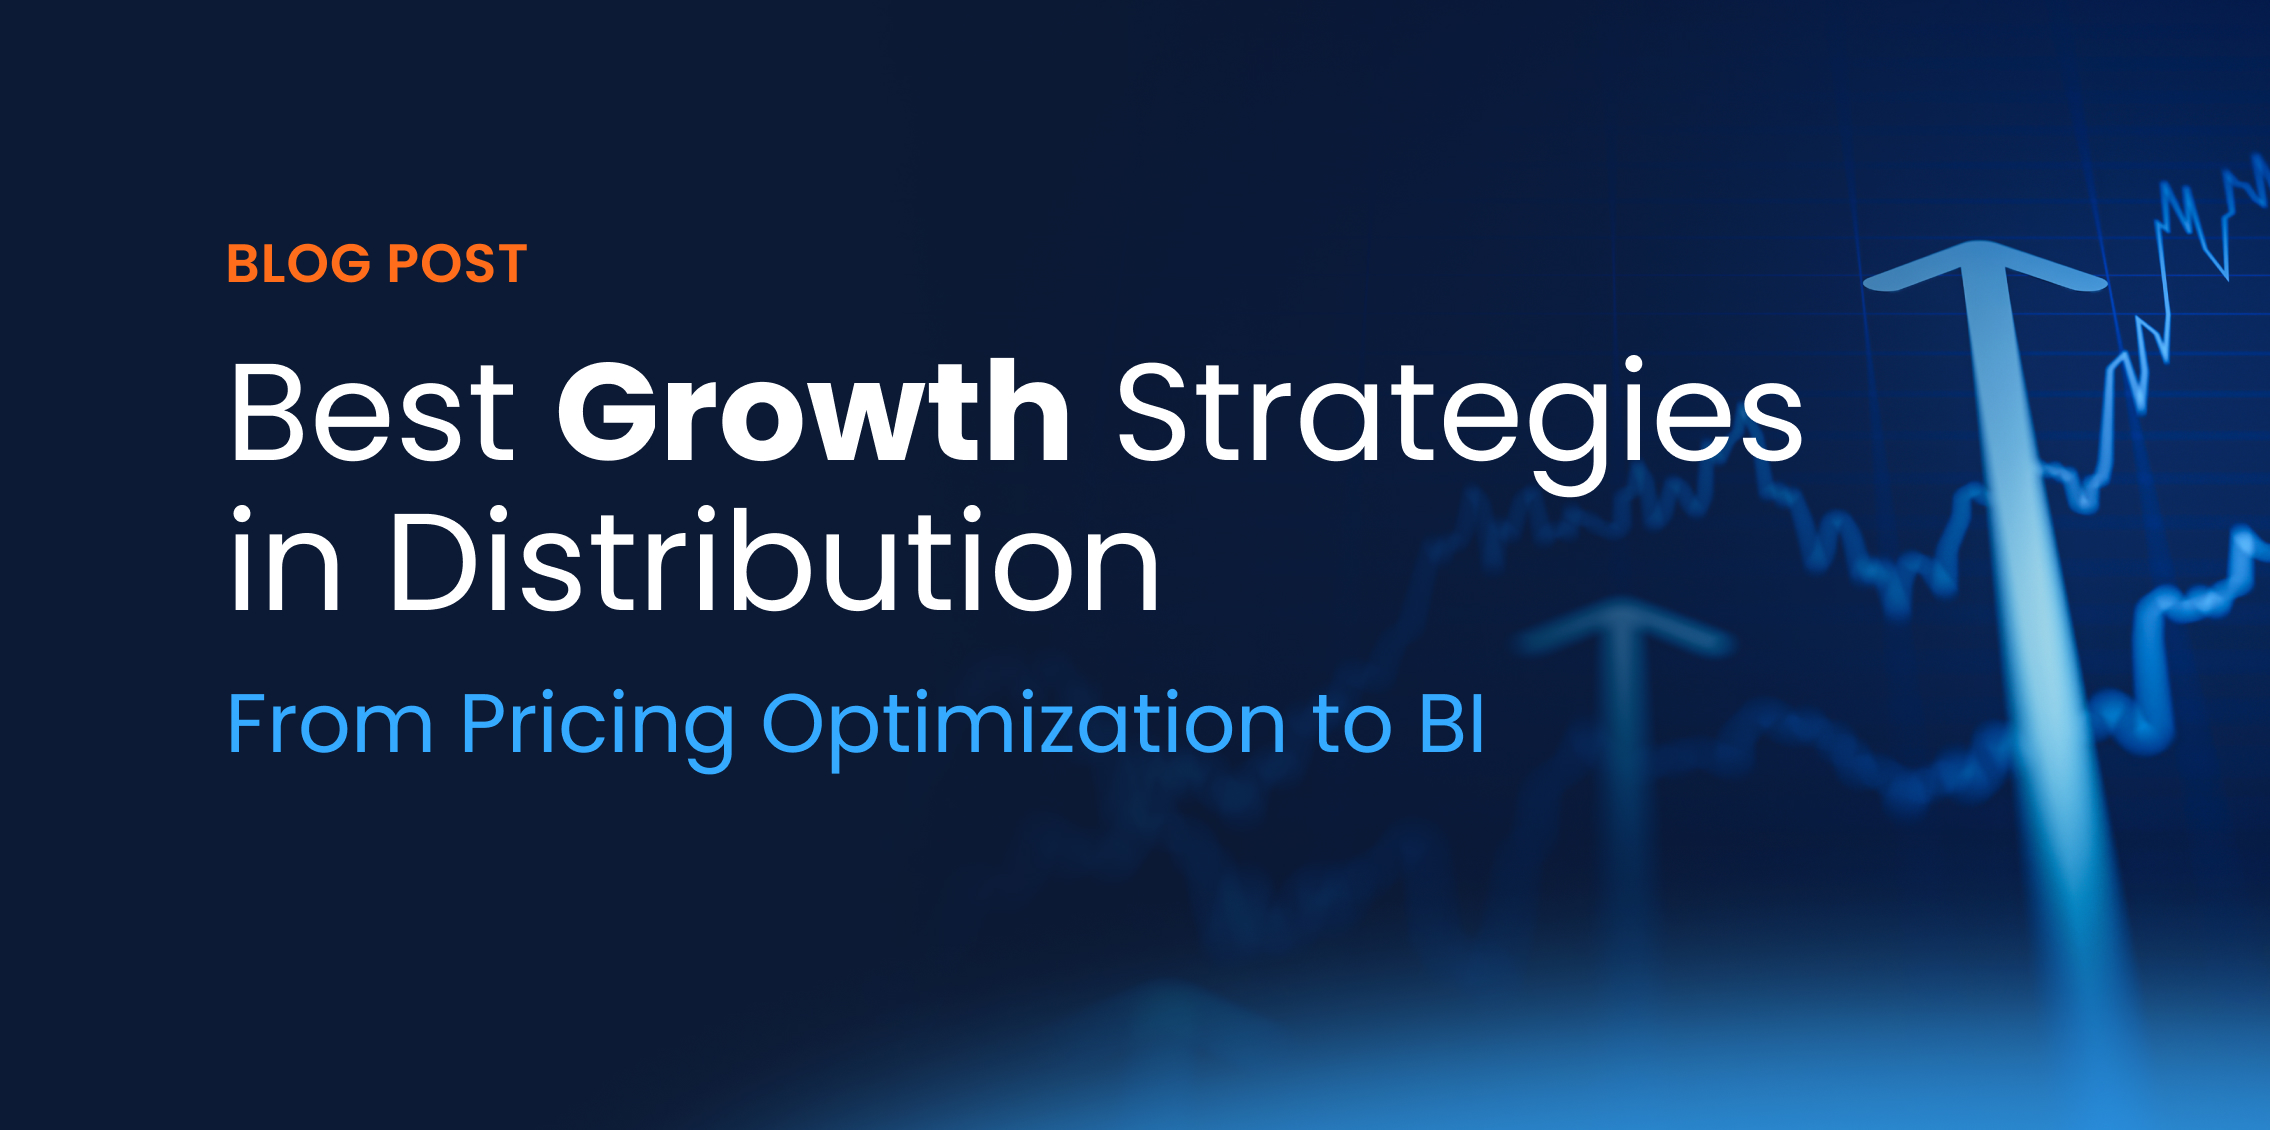 best growth strategies for distributors, including pricing optimization, marketing automation, and more